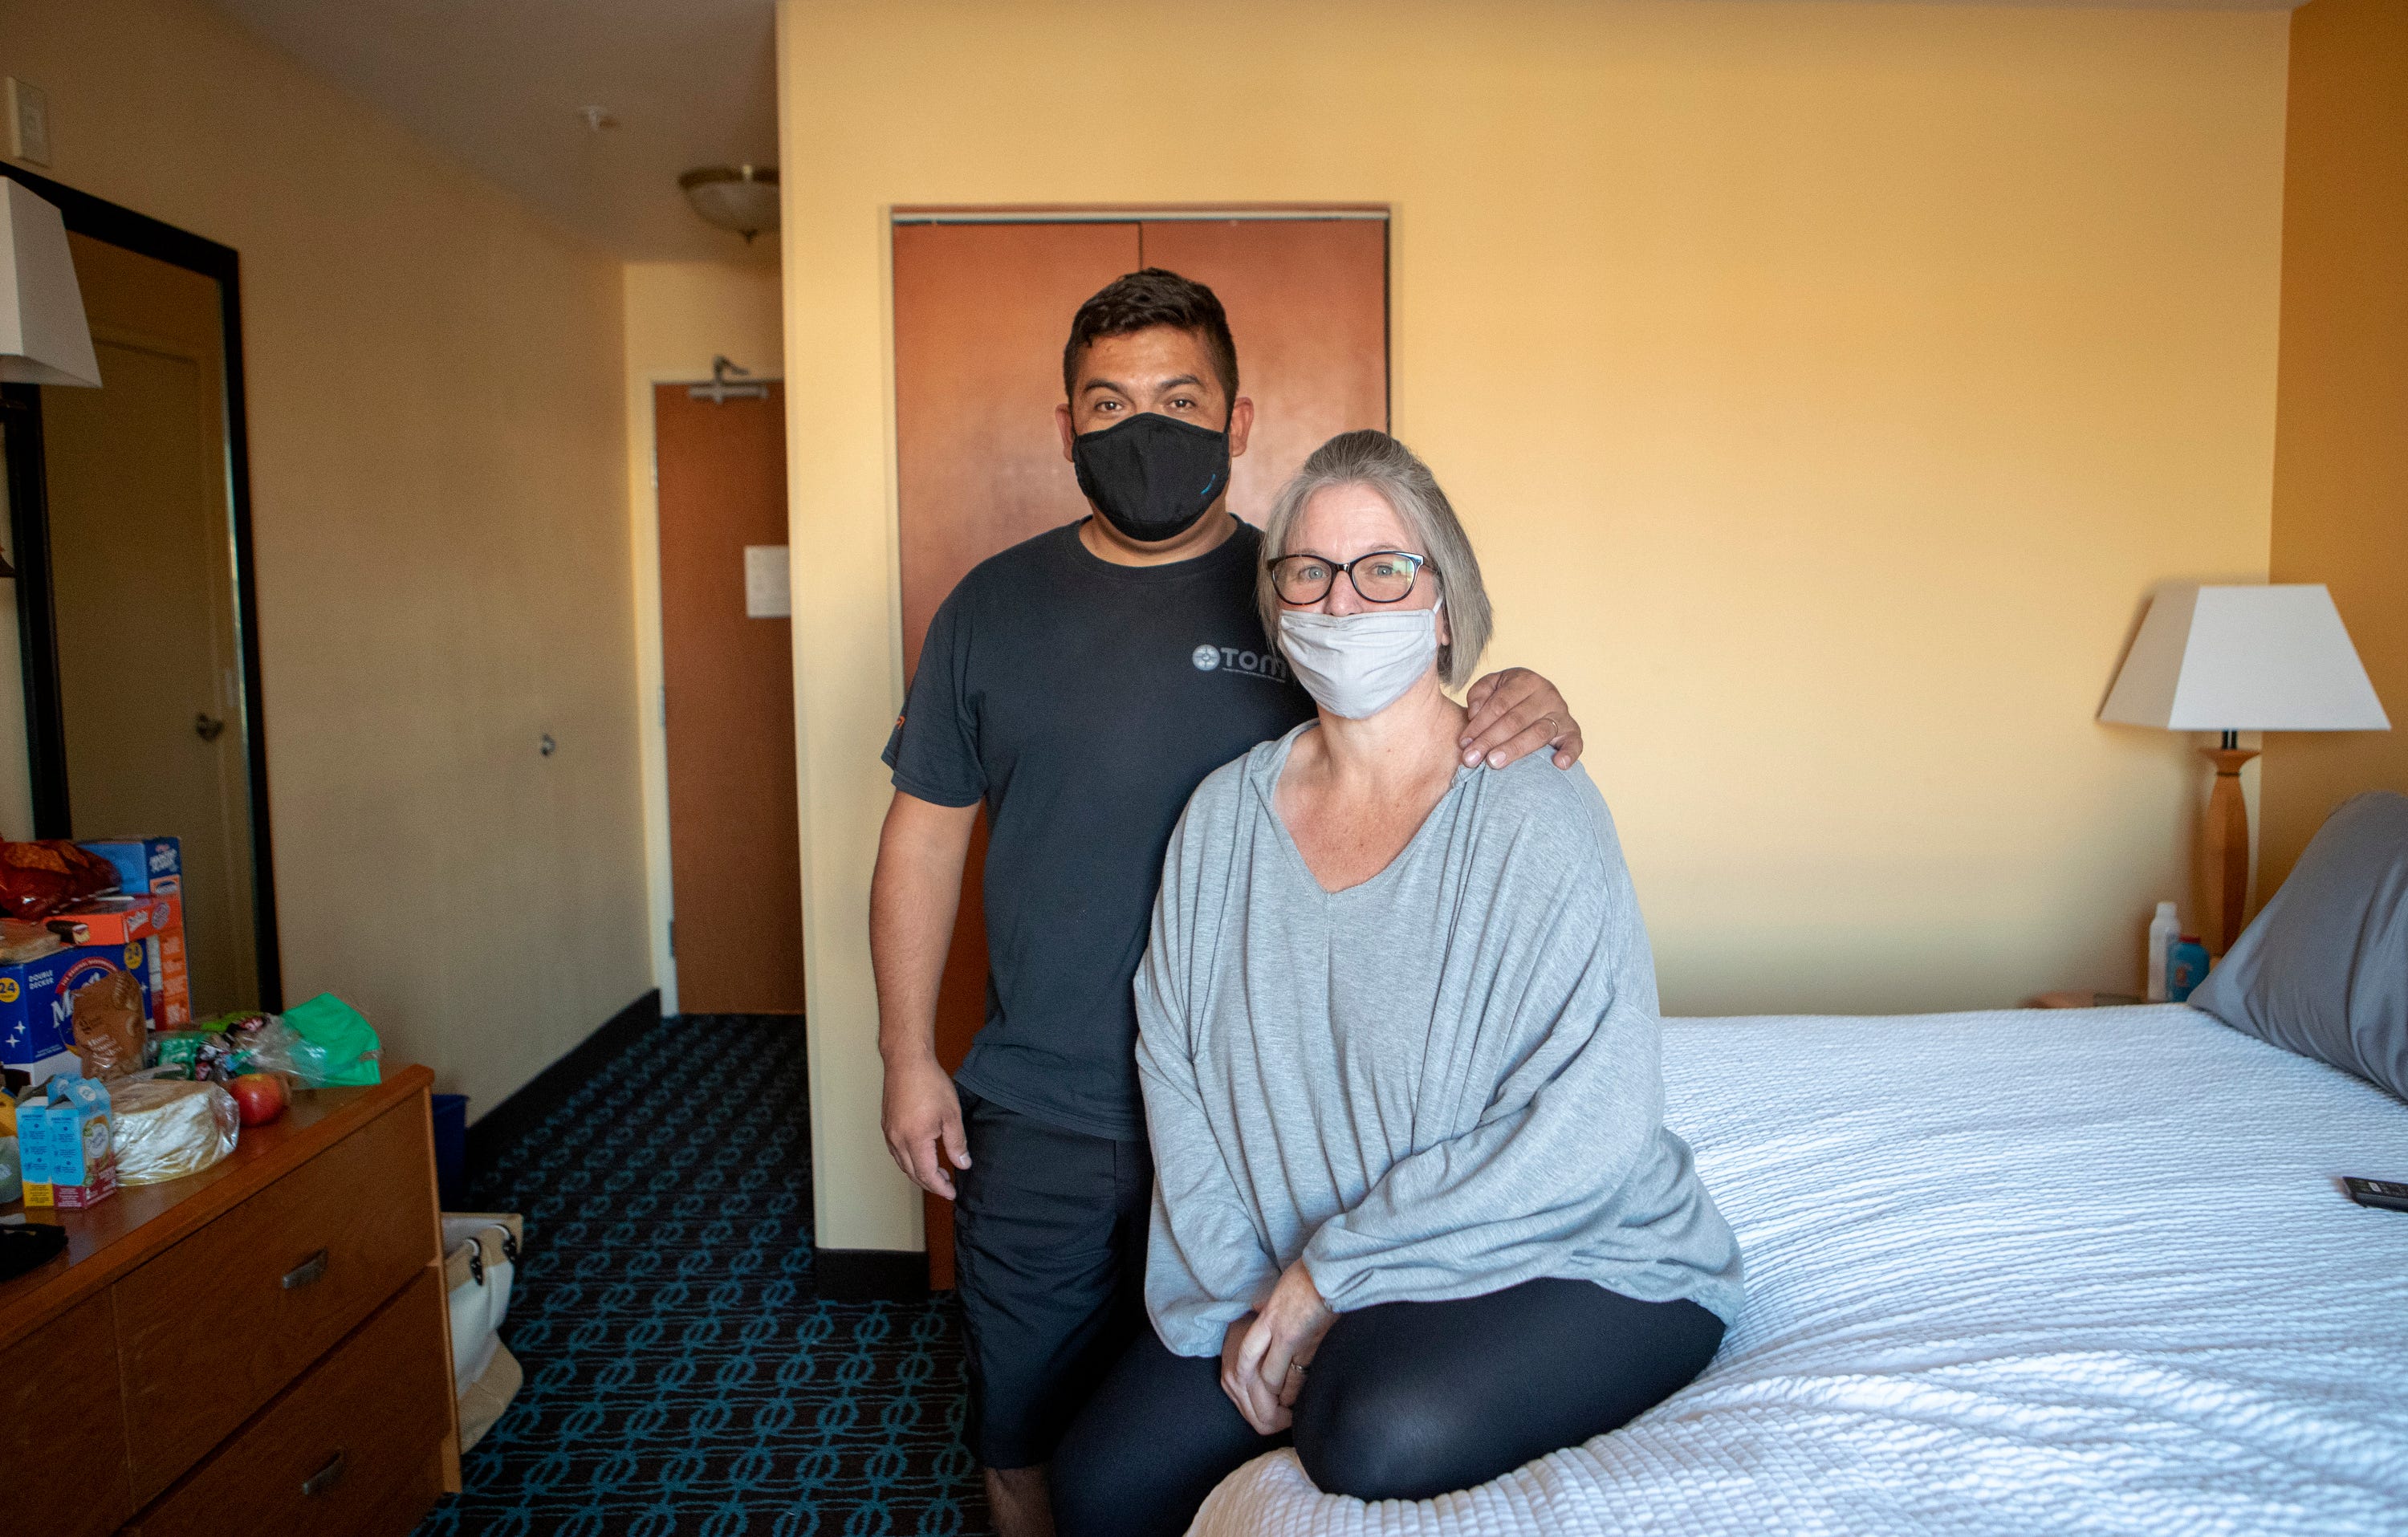 Evacuees from the El Dorado fire, Malissa and Joaquin Lopez, are photographed inside the San Bernardino, Calif., hotel they've been staying in for two weeks on September 22, 2020. The couple had just bought a new home in the Angelus Oaks area only four weeks before the fire broke out.